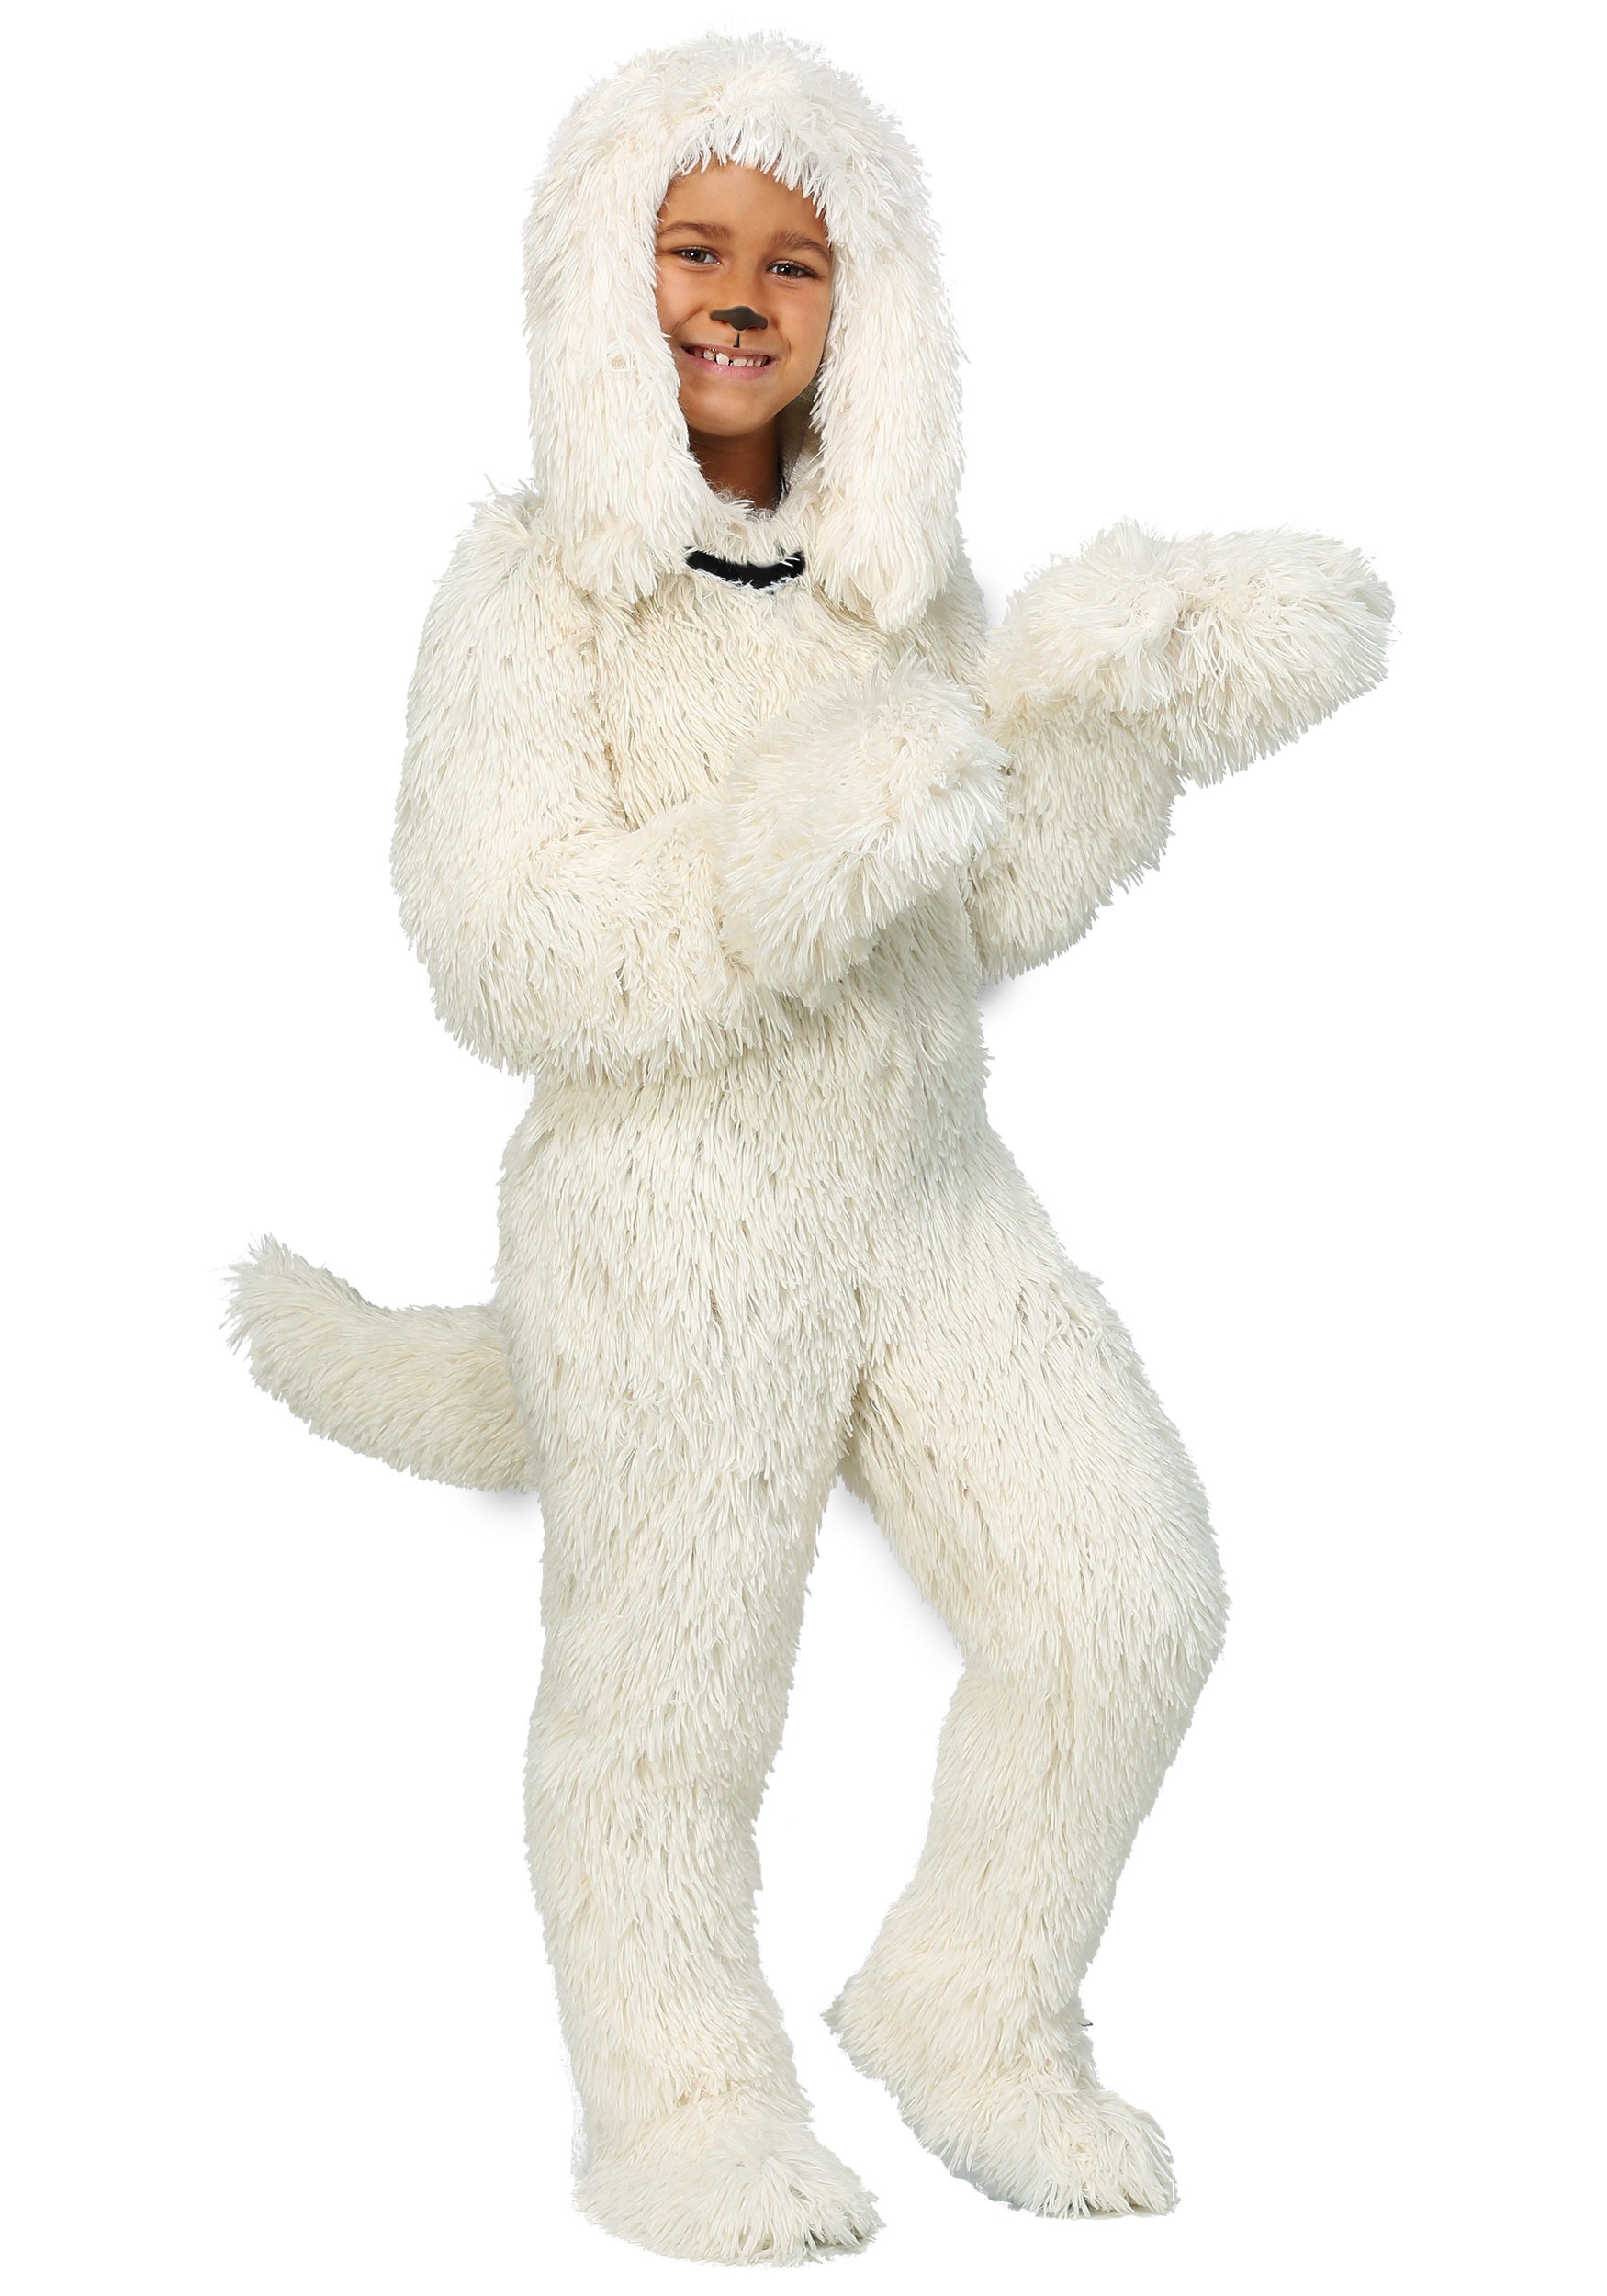 Photos - Fancy Dress FUN Costumes Shaggy Sheep Dog Costume for Kids | Kid's Animal Costumes Whi